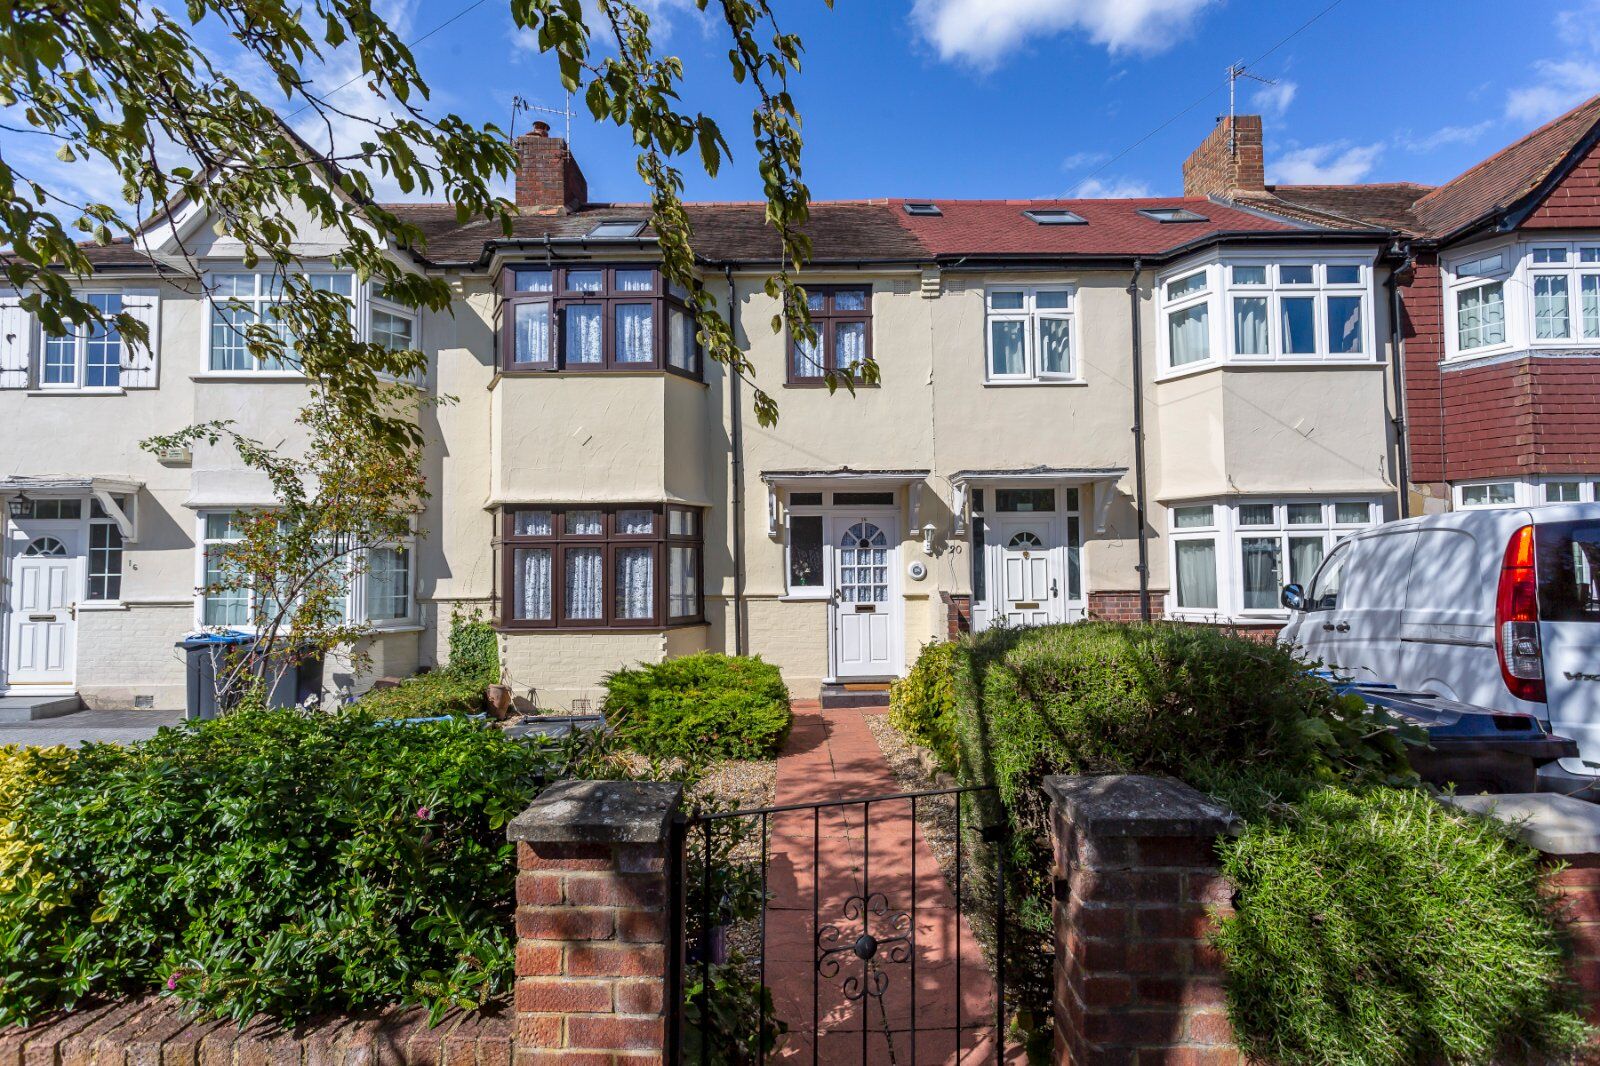 4 bedroom mid terraced house for sale Maycross Avenue, Morden, SM4, main image